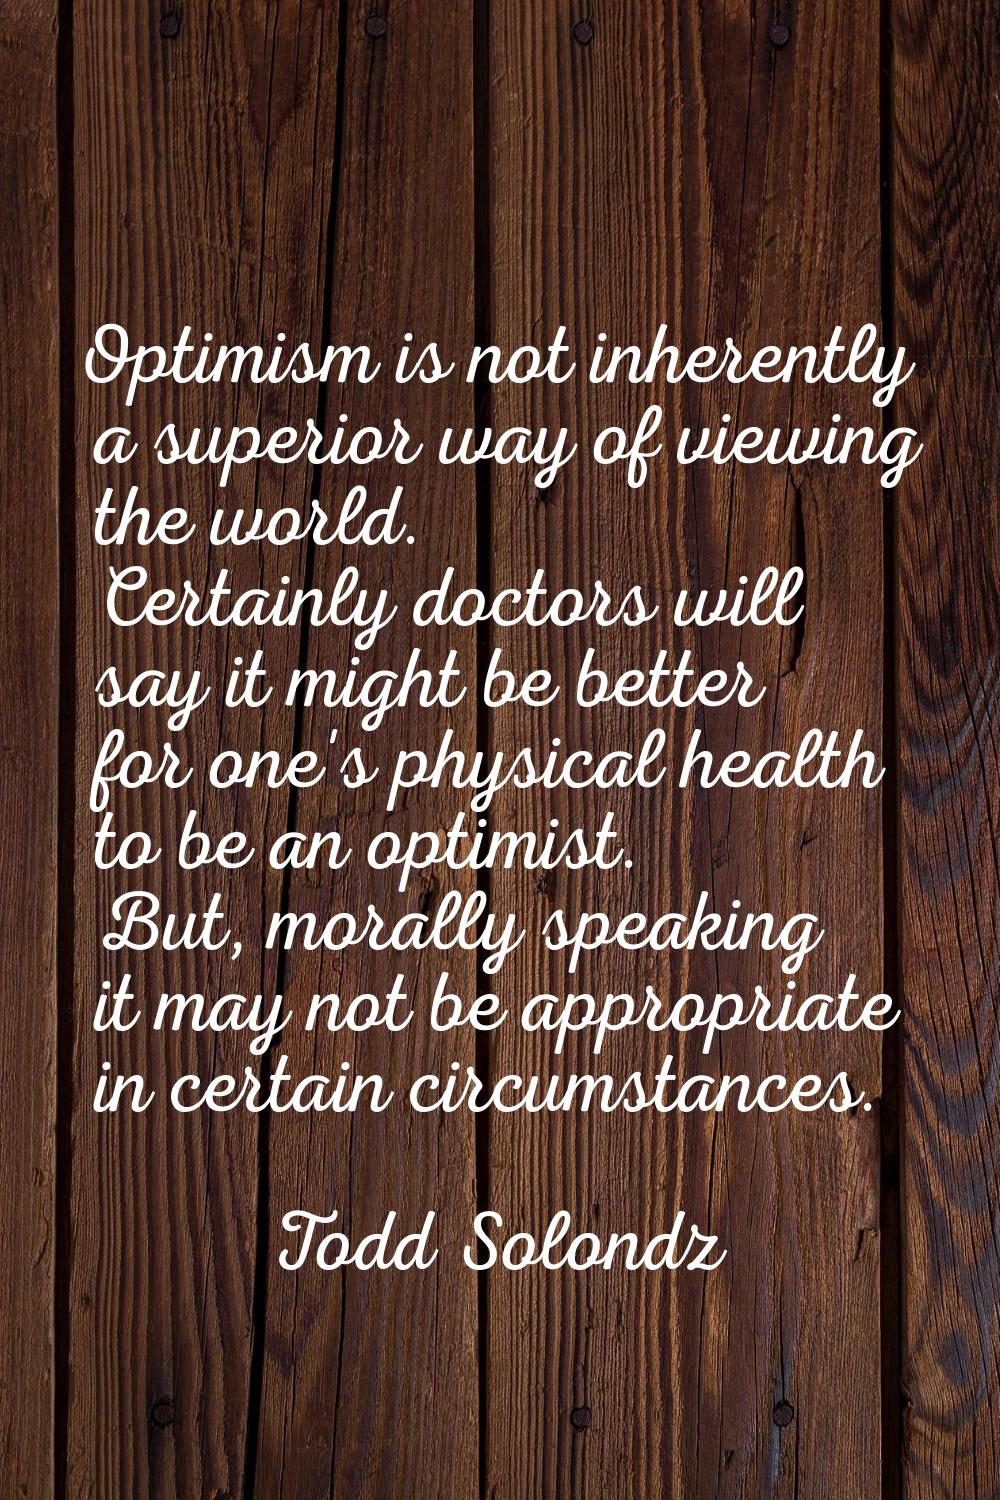 Optimism is not inherently a superior way of viewing the world. Certainly doctors will say it might